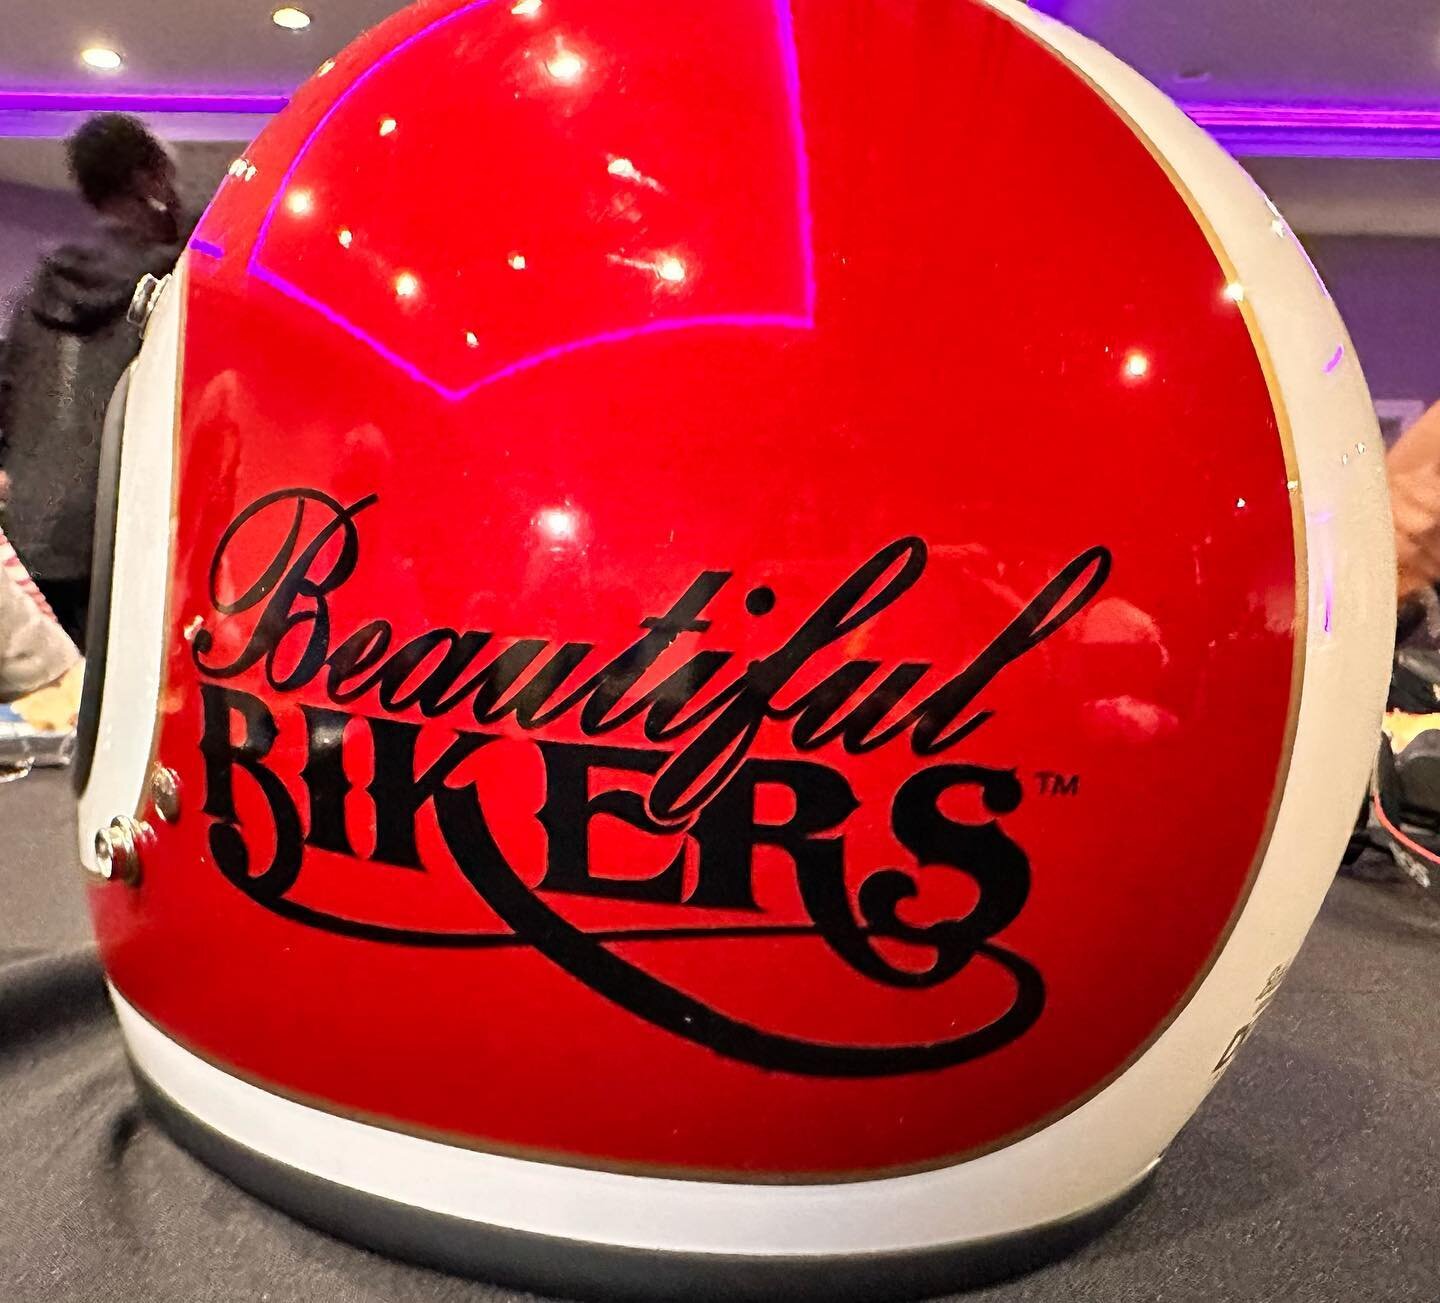 Thank you Porsche Taylor for a beautiful conference with beautiful women!!! #blackgirlsride #beautifulbikersconference #indianmotorcycle #womensupportingwomen #womenmotorcyclists #bmwmotorrad #triumphmotorcycles #hondapowesports